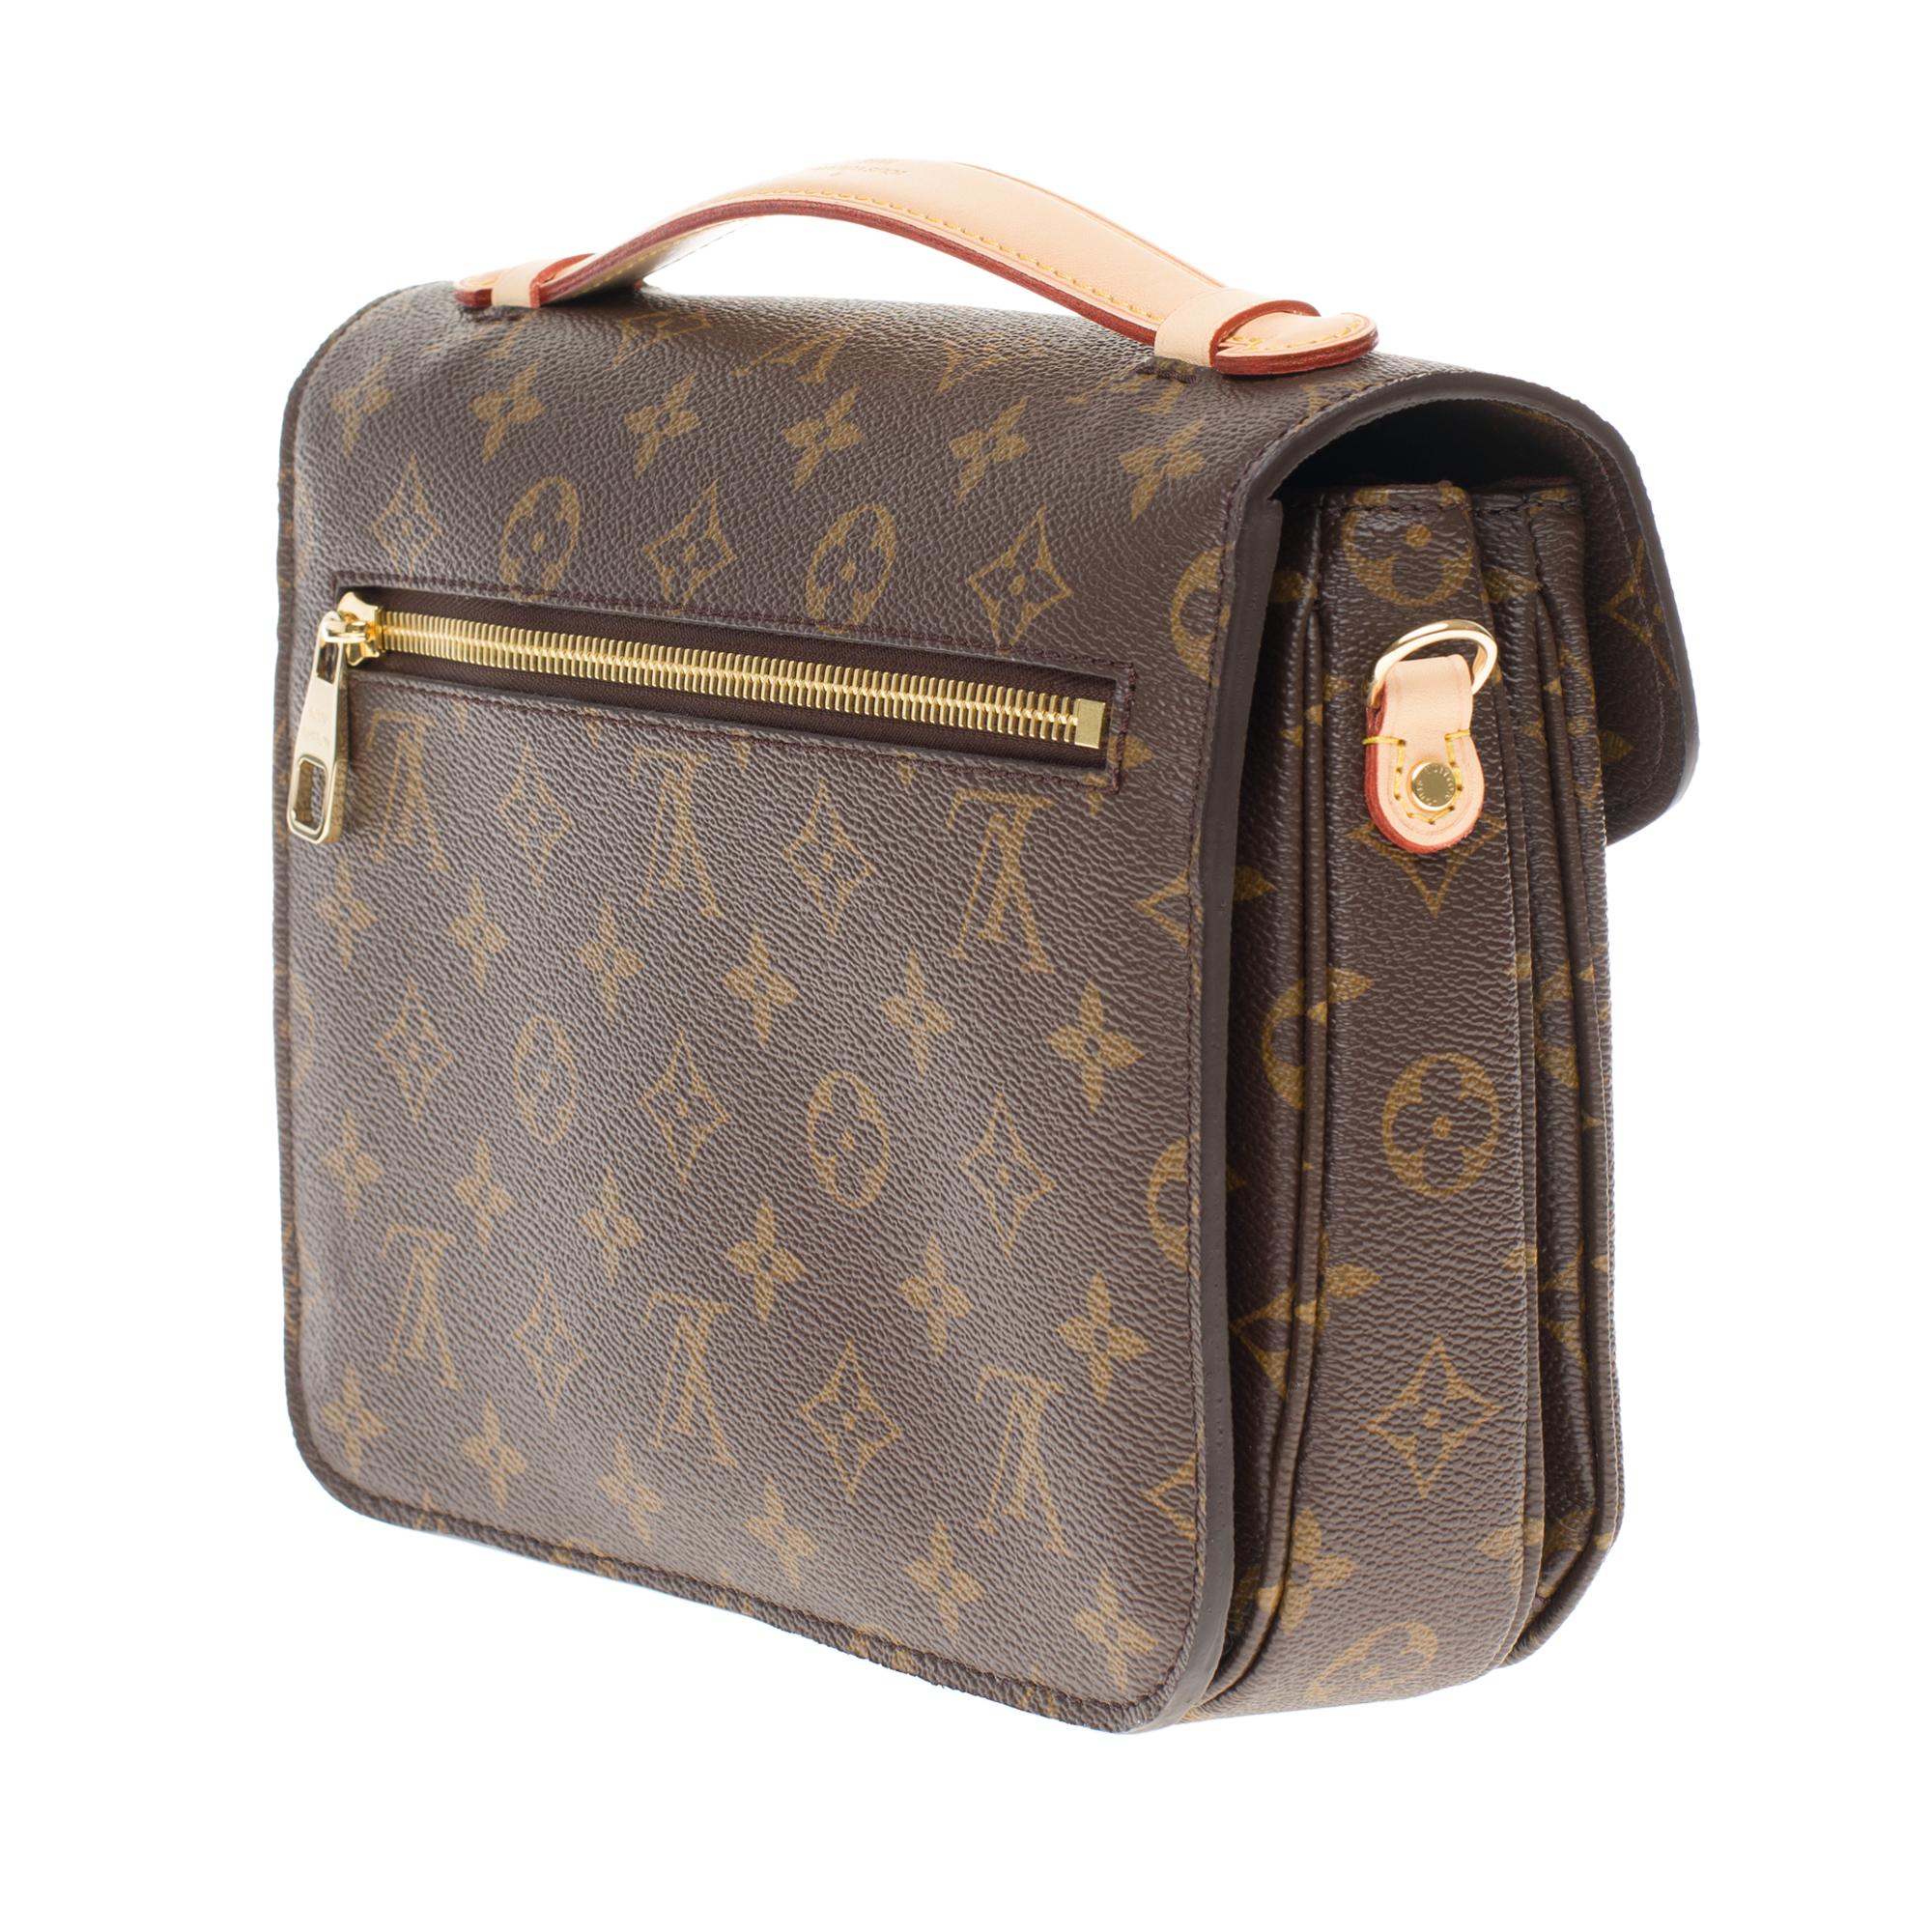 Gray Brand New -The Must have Louis Vuitton Metis Shoulder bag in Monogram canvas !